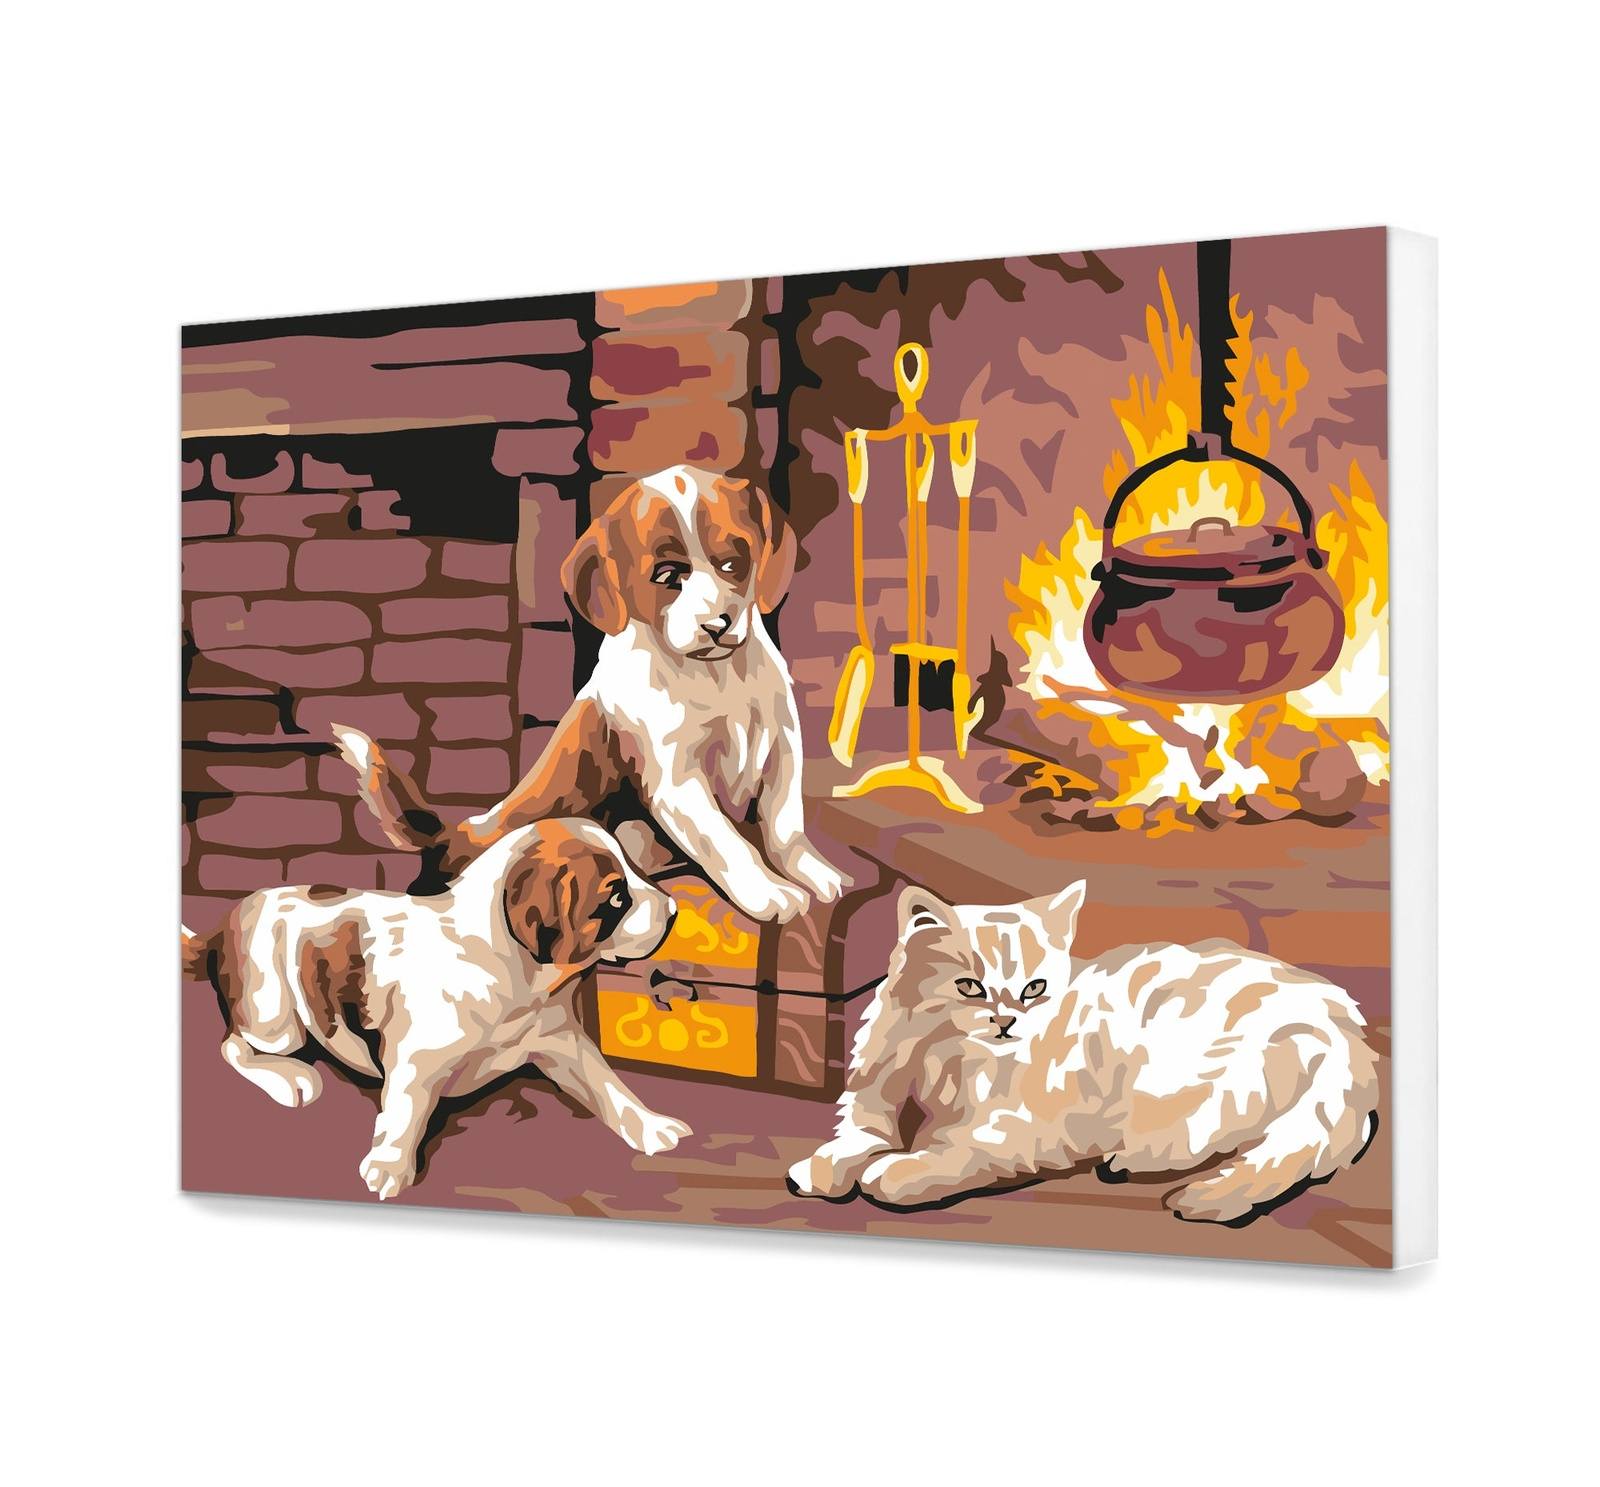 Animals At The Fireplace (Hp0463)